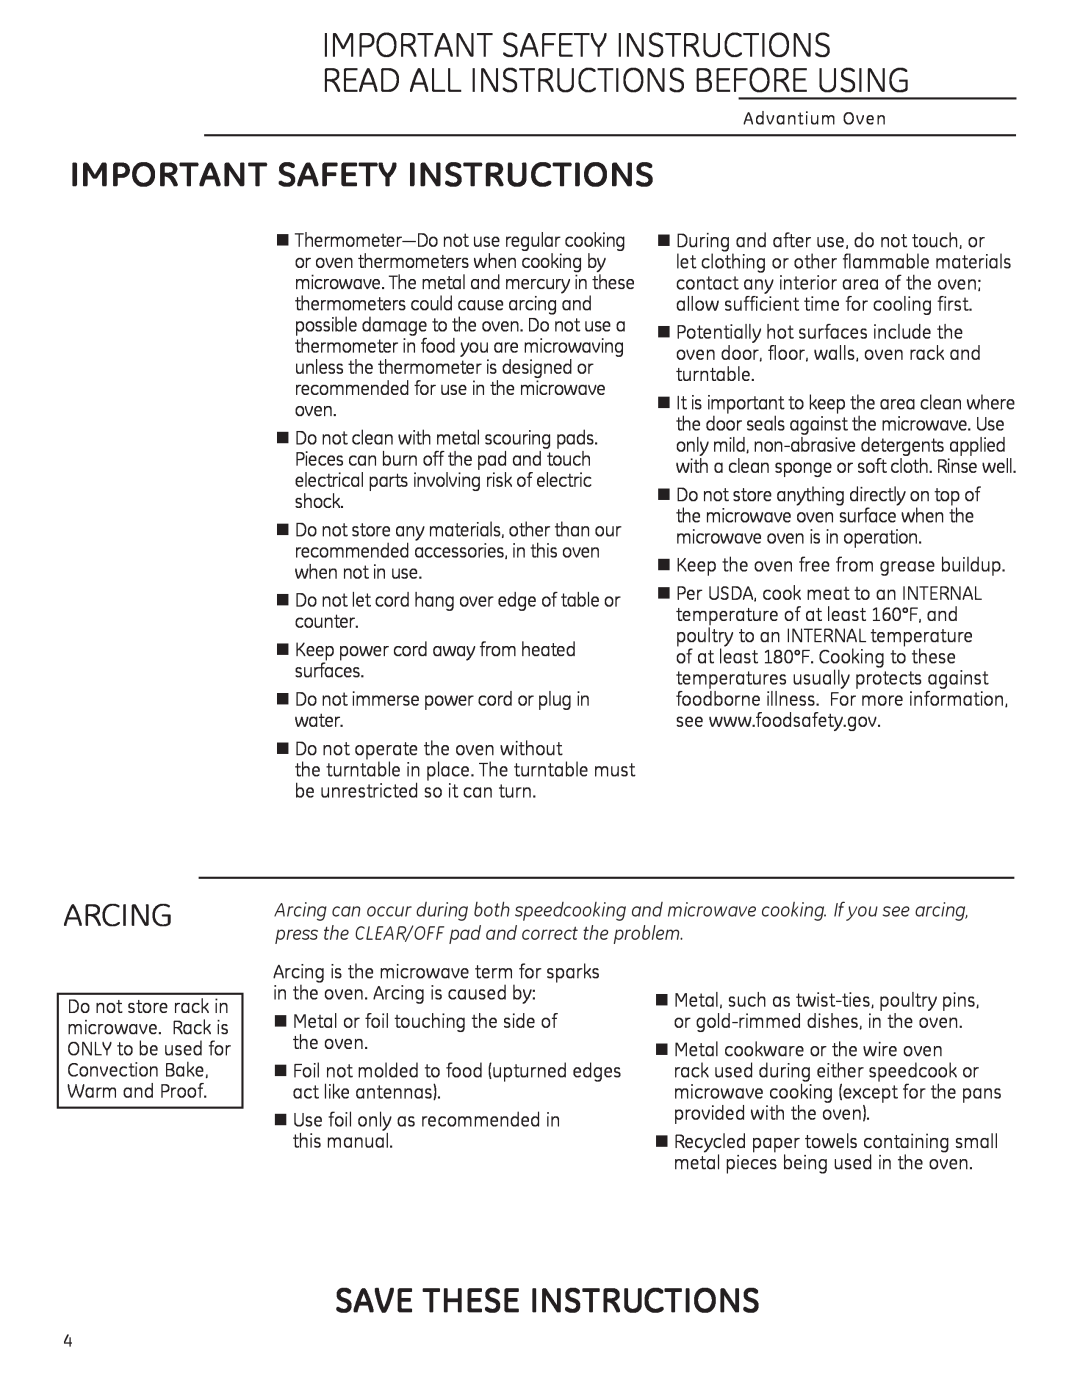 GE PSA1201, PSA1200 Arcing, Important Safety Instructions, Read All Instructions Before Using, Save These Instructions 